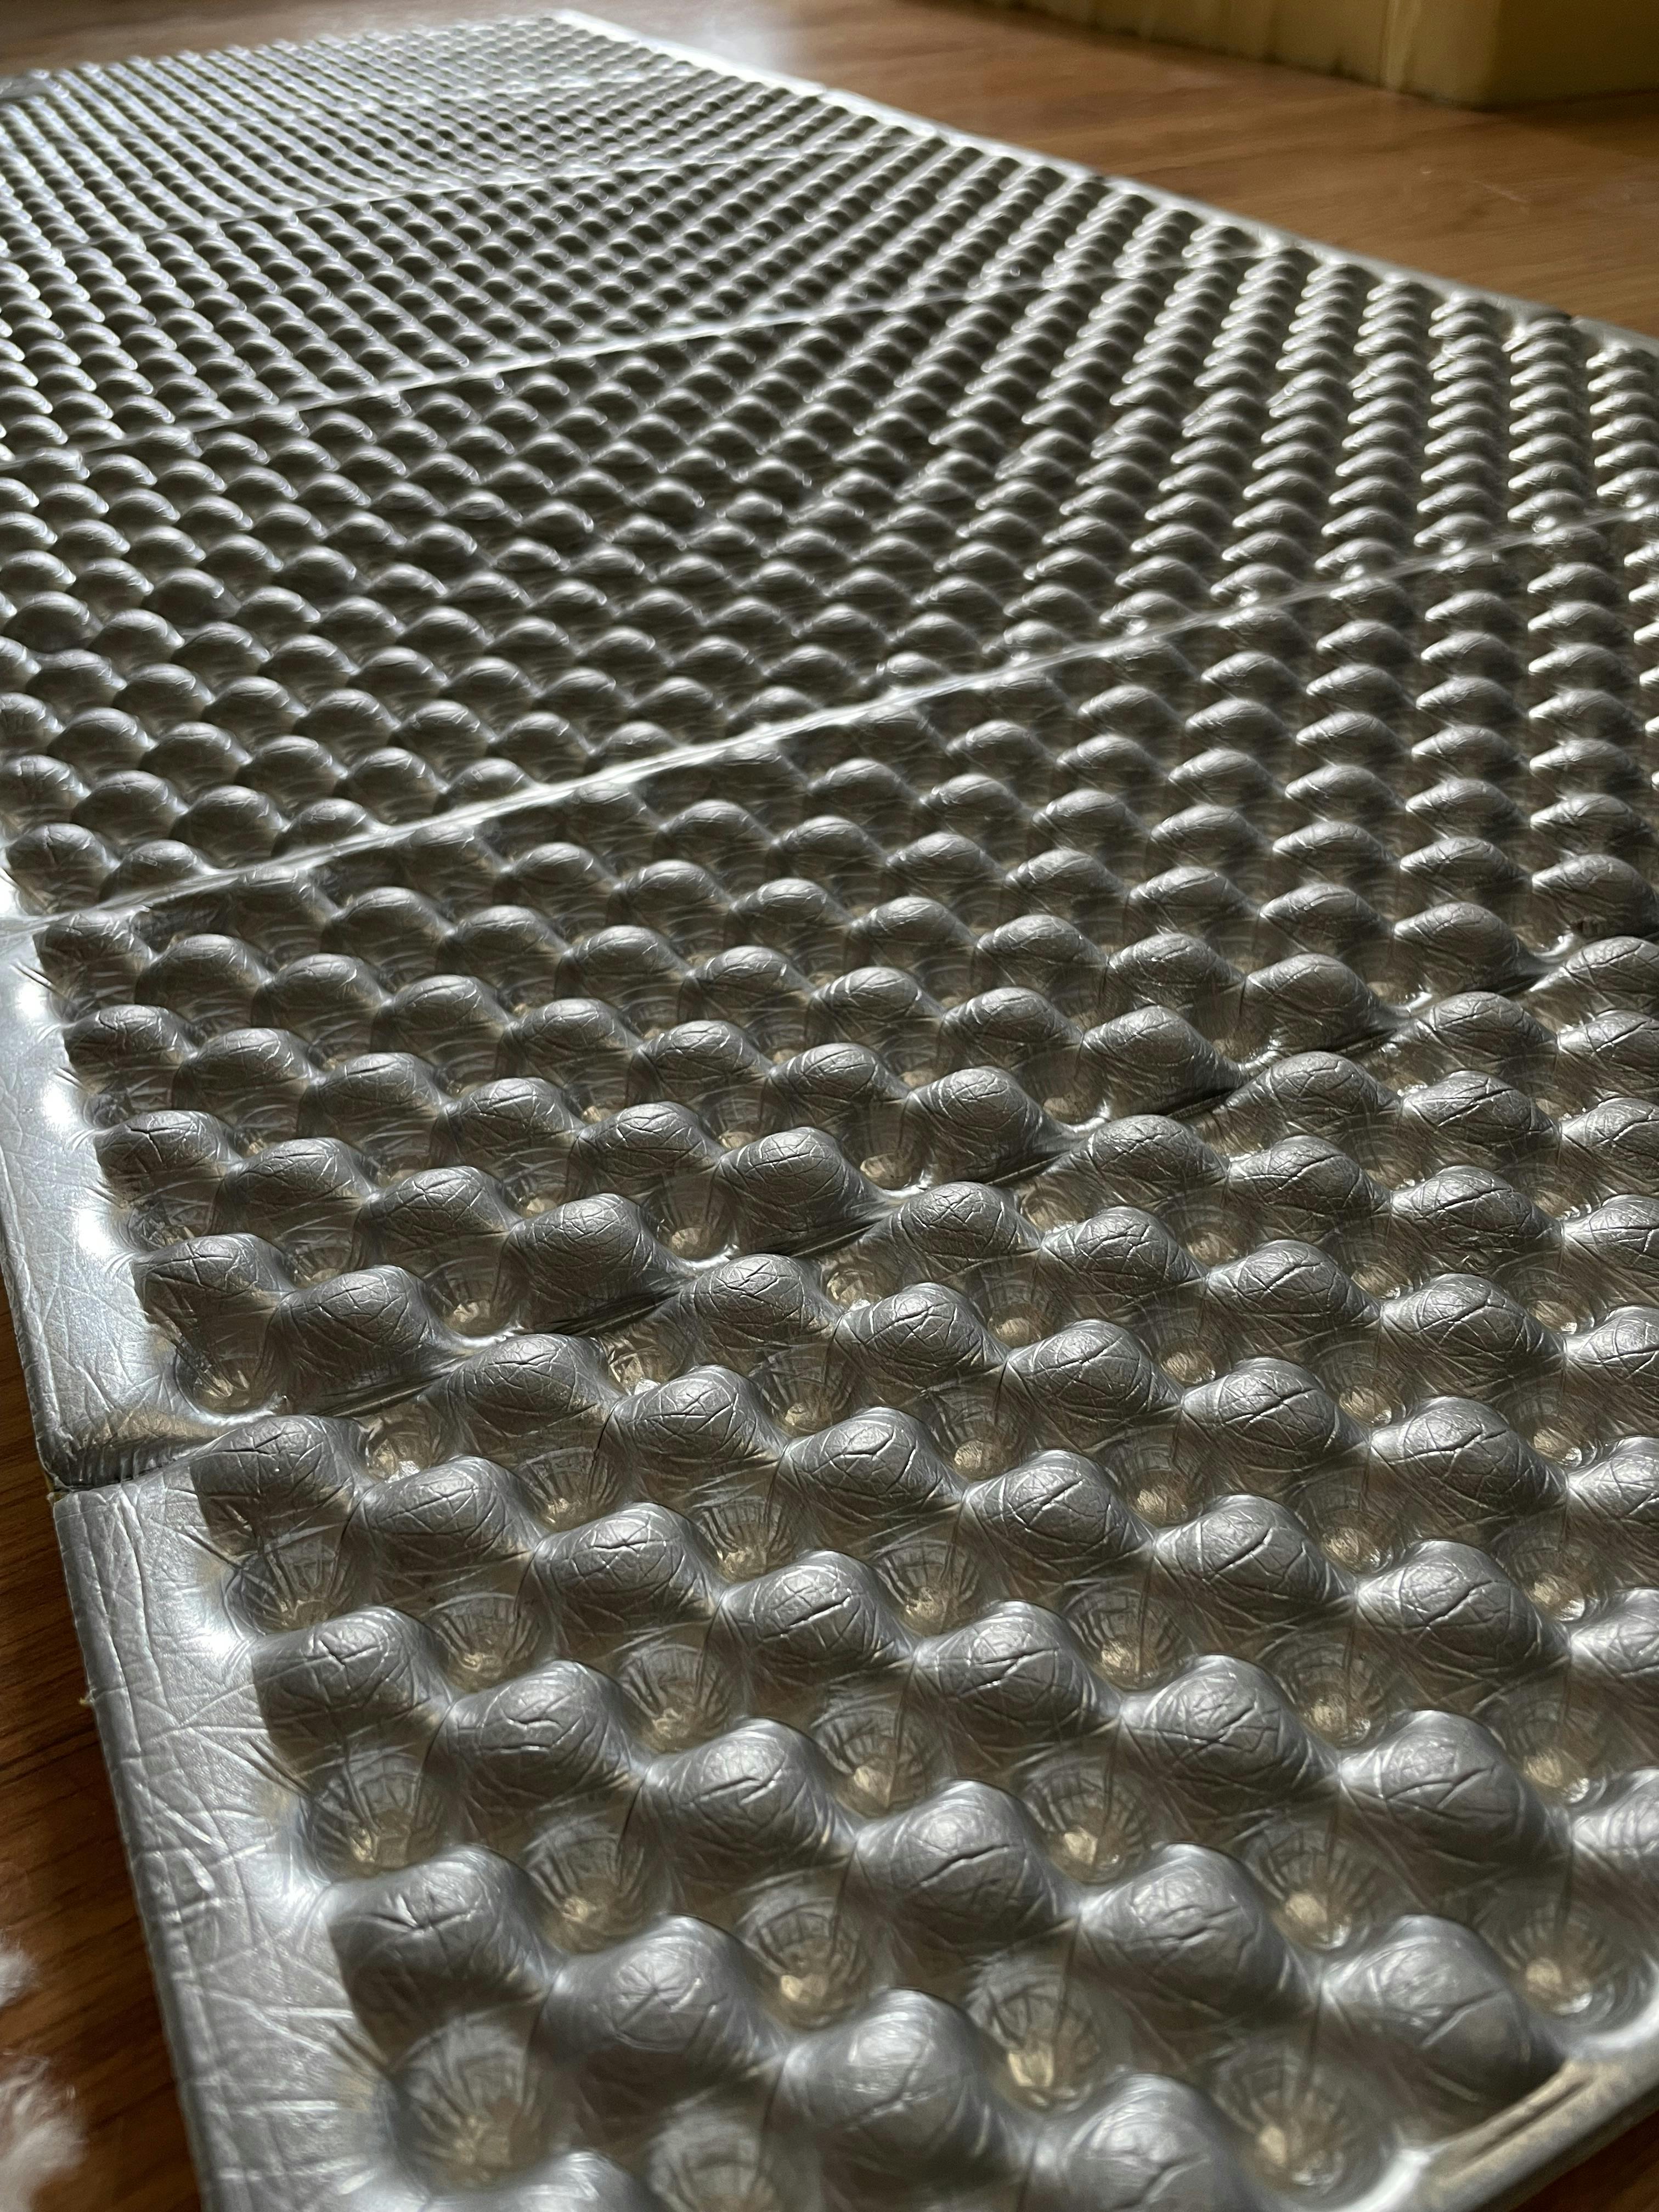 Surface of the Therm-a-Rest Z-Lite SOL Sleeping Pad.